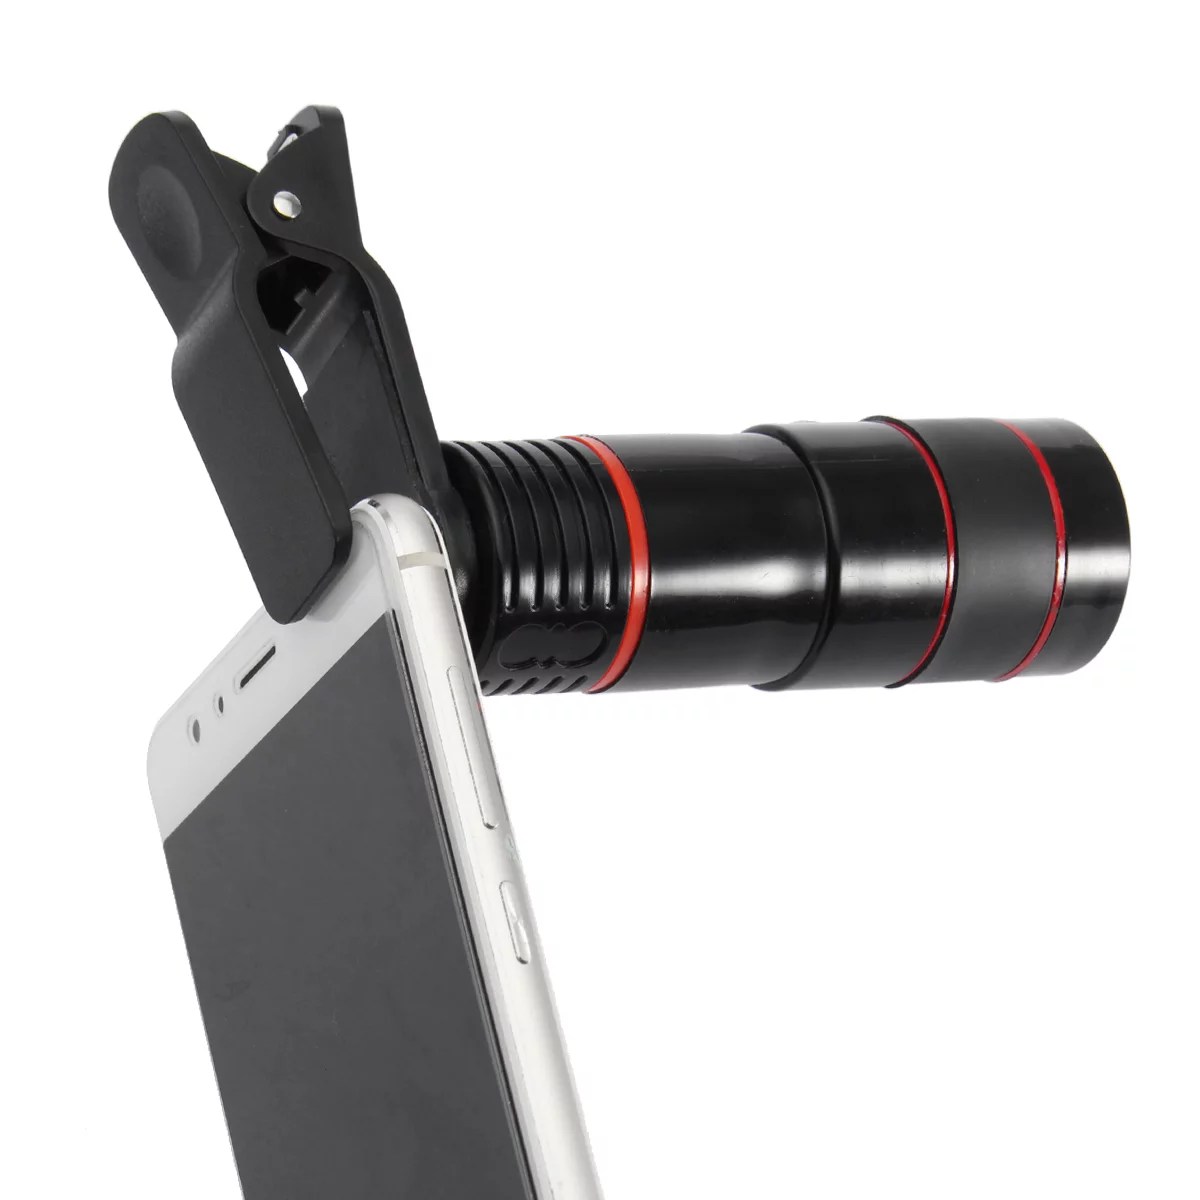 Cell Phone Camera Lens. 812X Zoom Telephoto Lens. HD